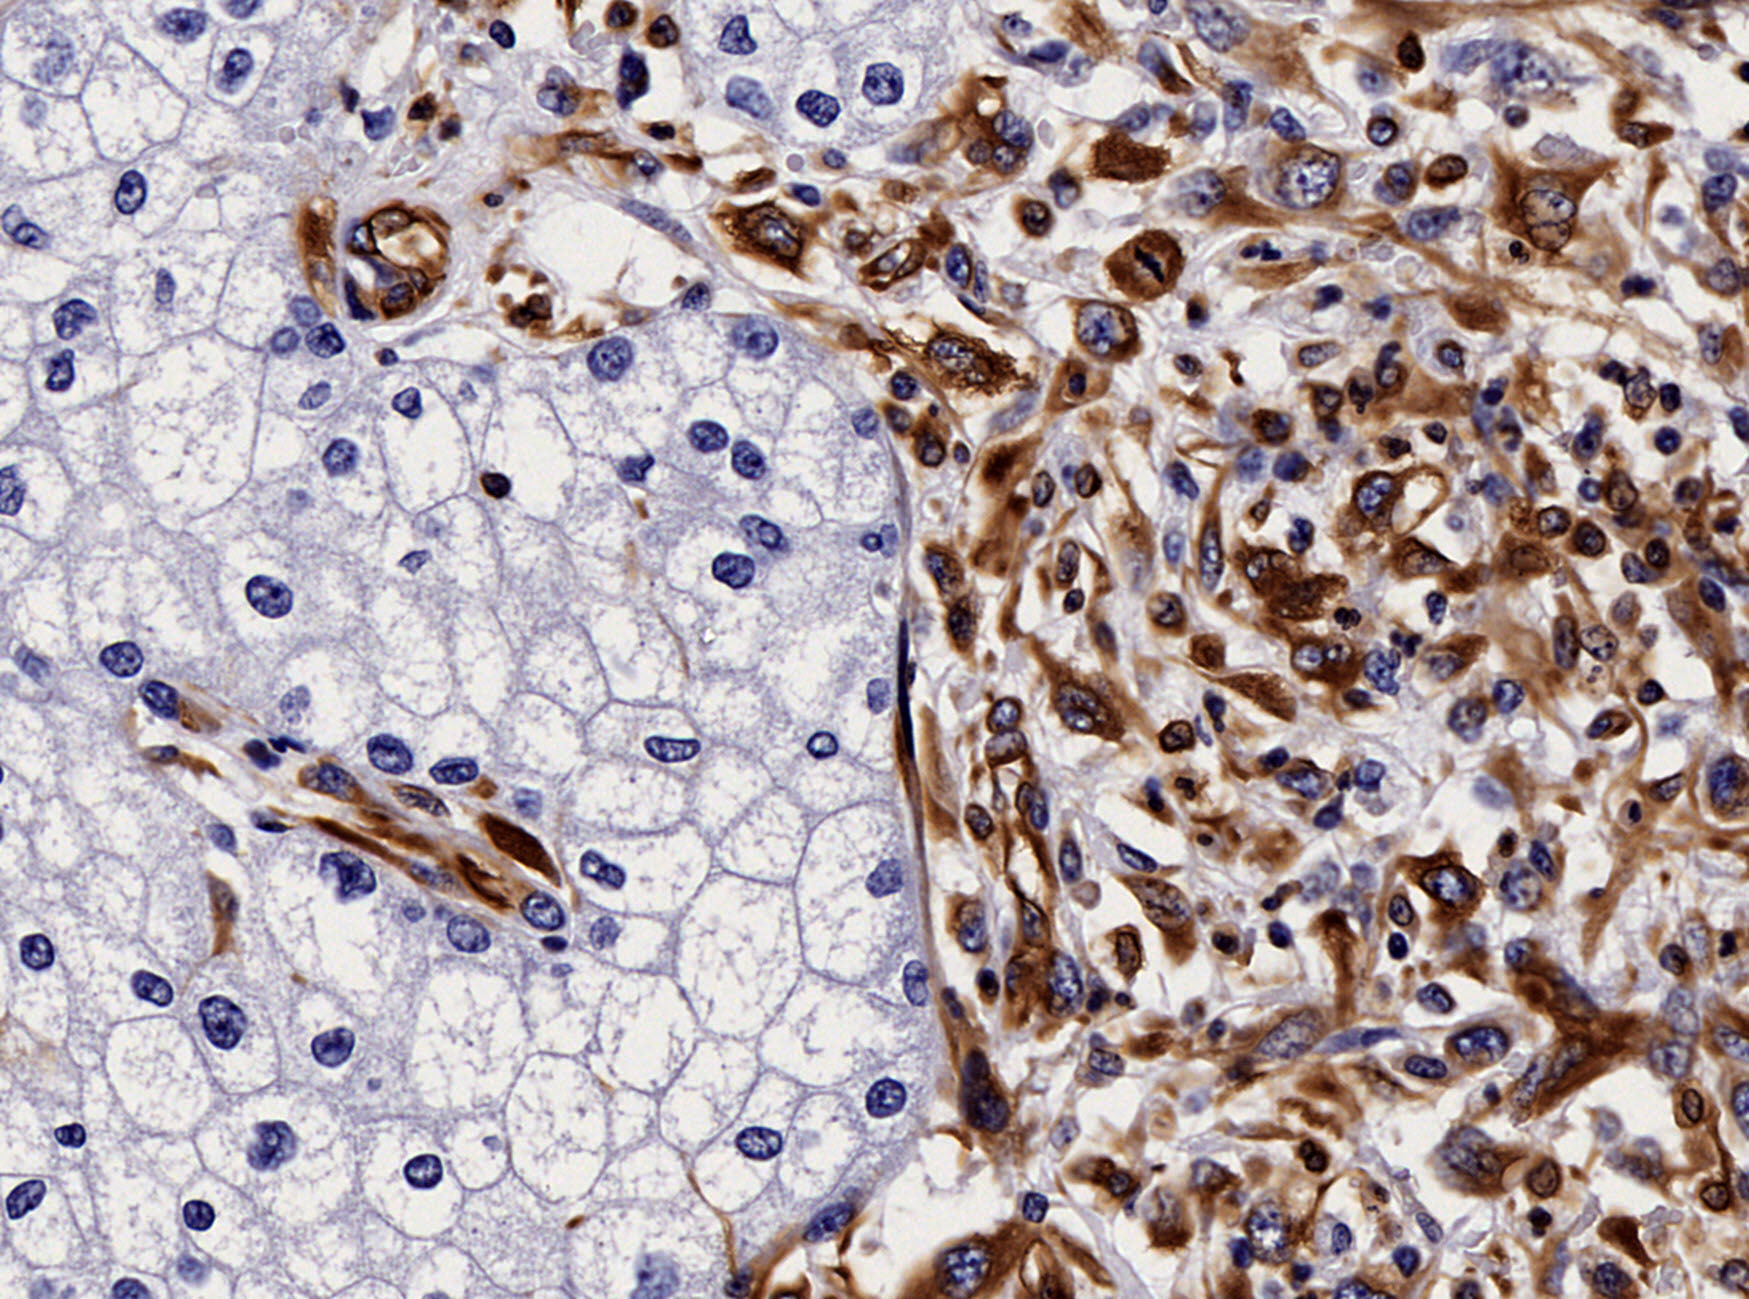 Chromophobe renal cell carcinoma with sarcomatoid differentiation